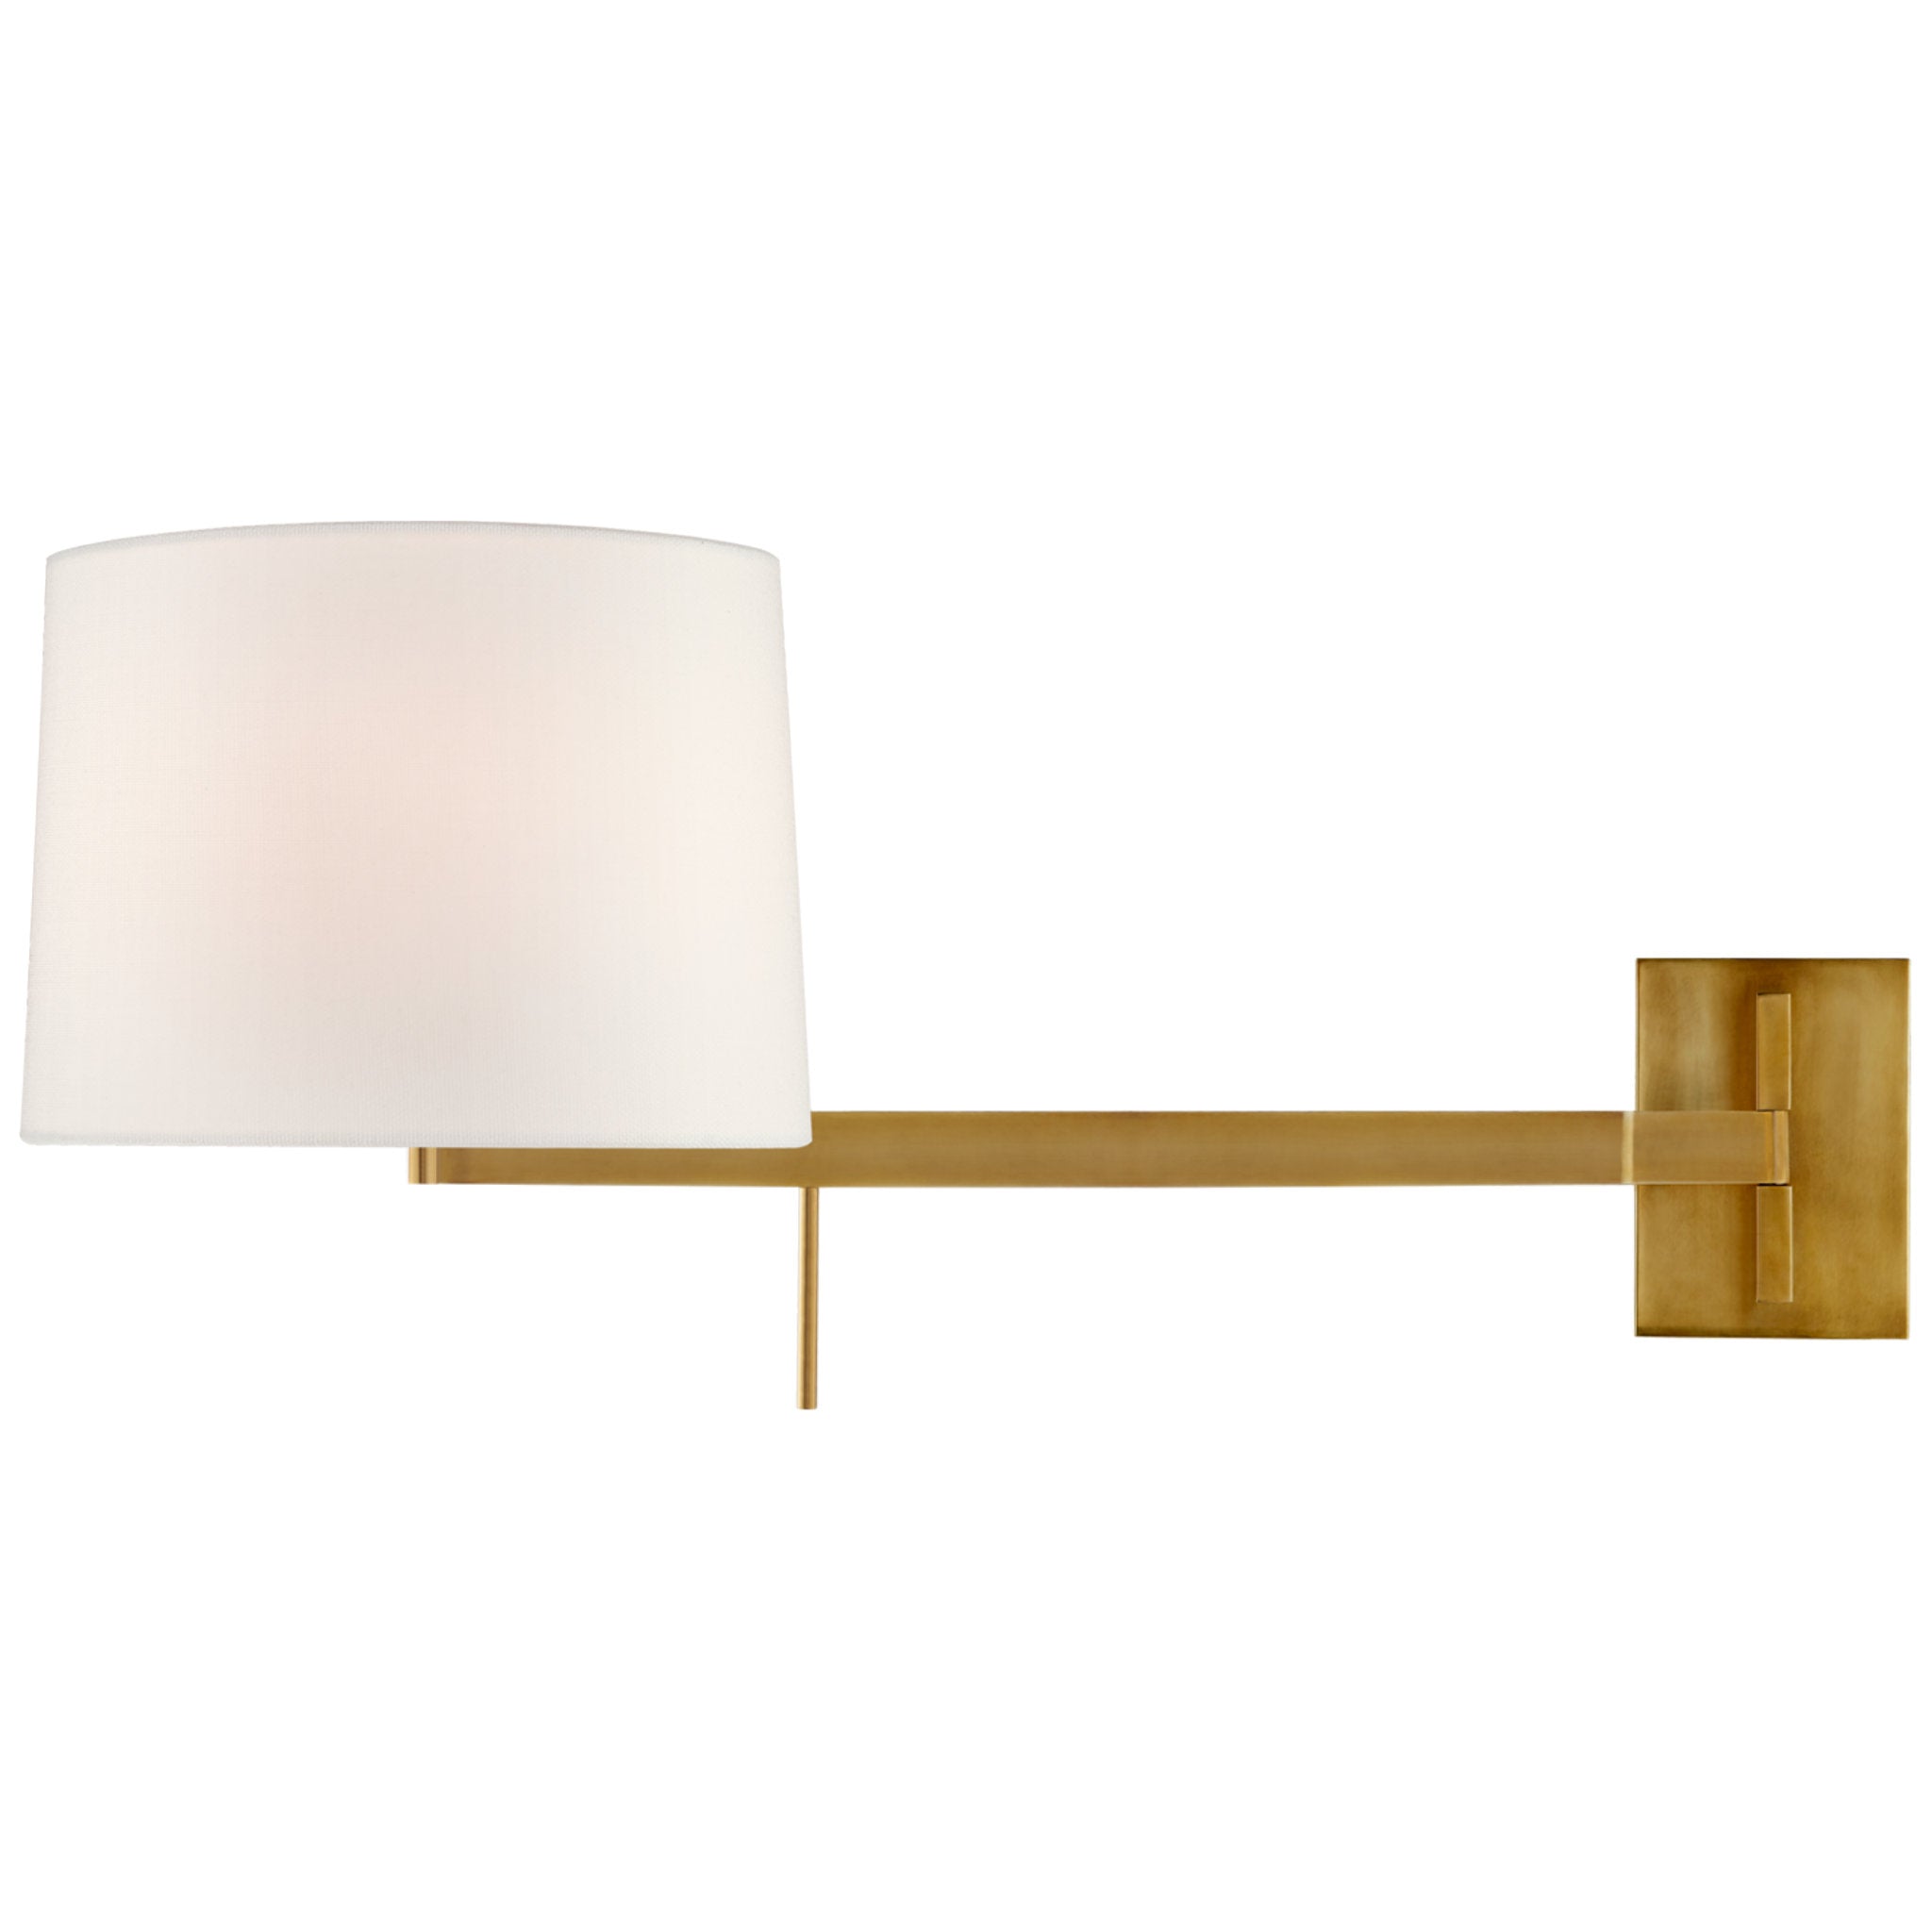 Barbara Barry Sweep Medium Right Articulating Sconce in Soft Brass with Linen Shade